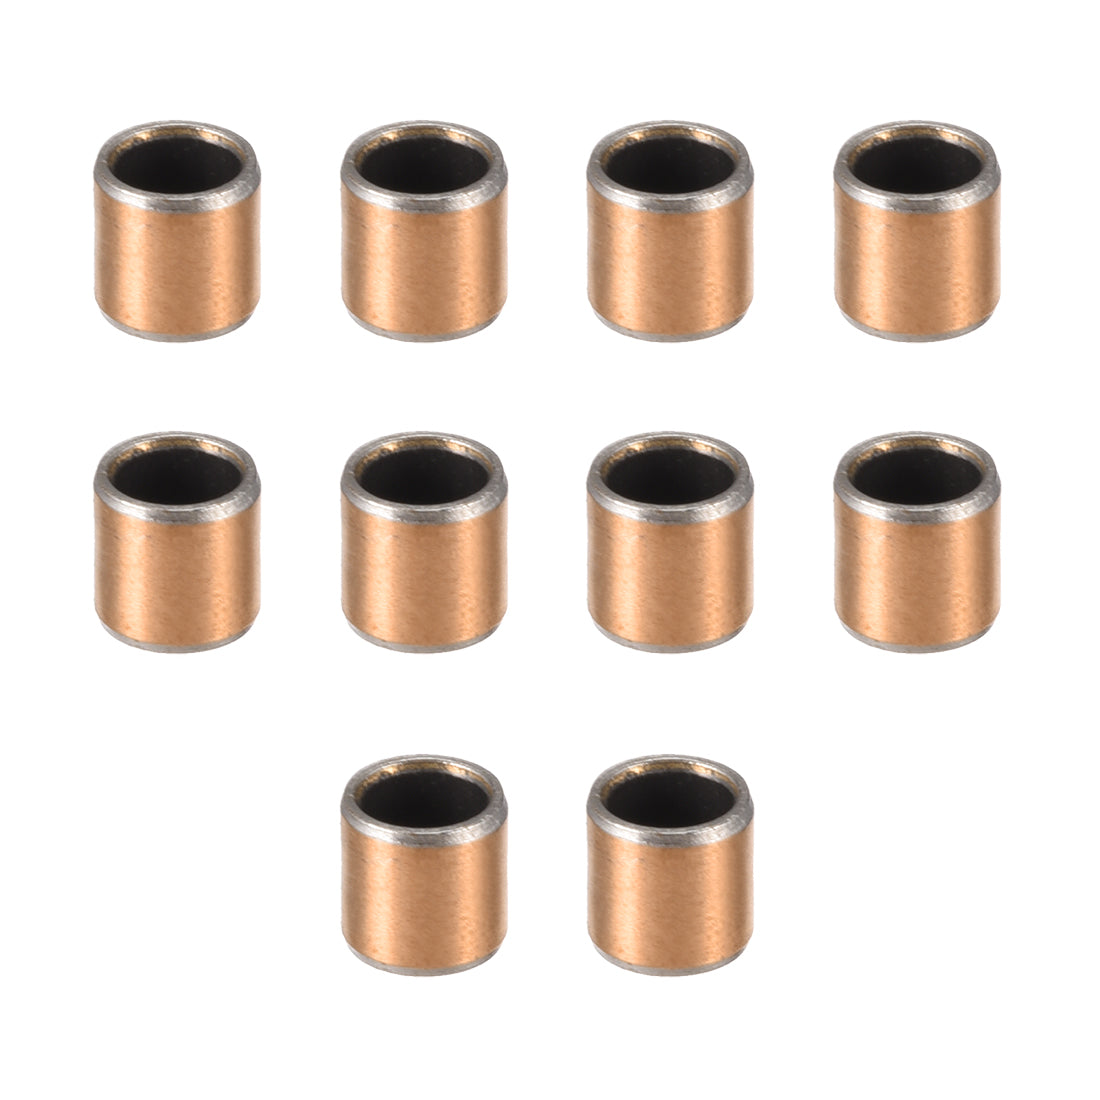 uxcell Uxcell Sleeve (Plain) Bearings 6mm Bore x 8mm OD x 8mm Wrapped Oilless Bushings 10Pcs